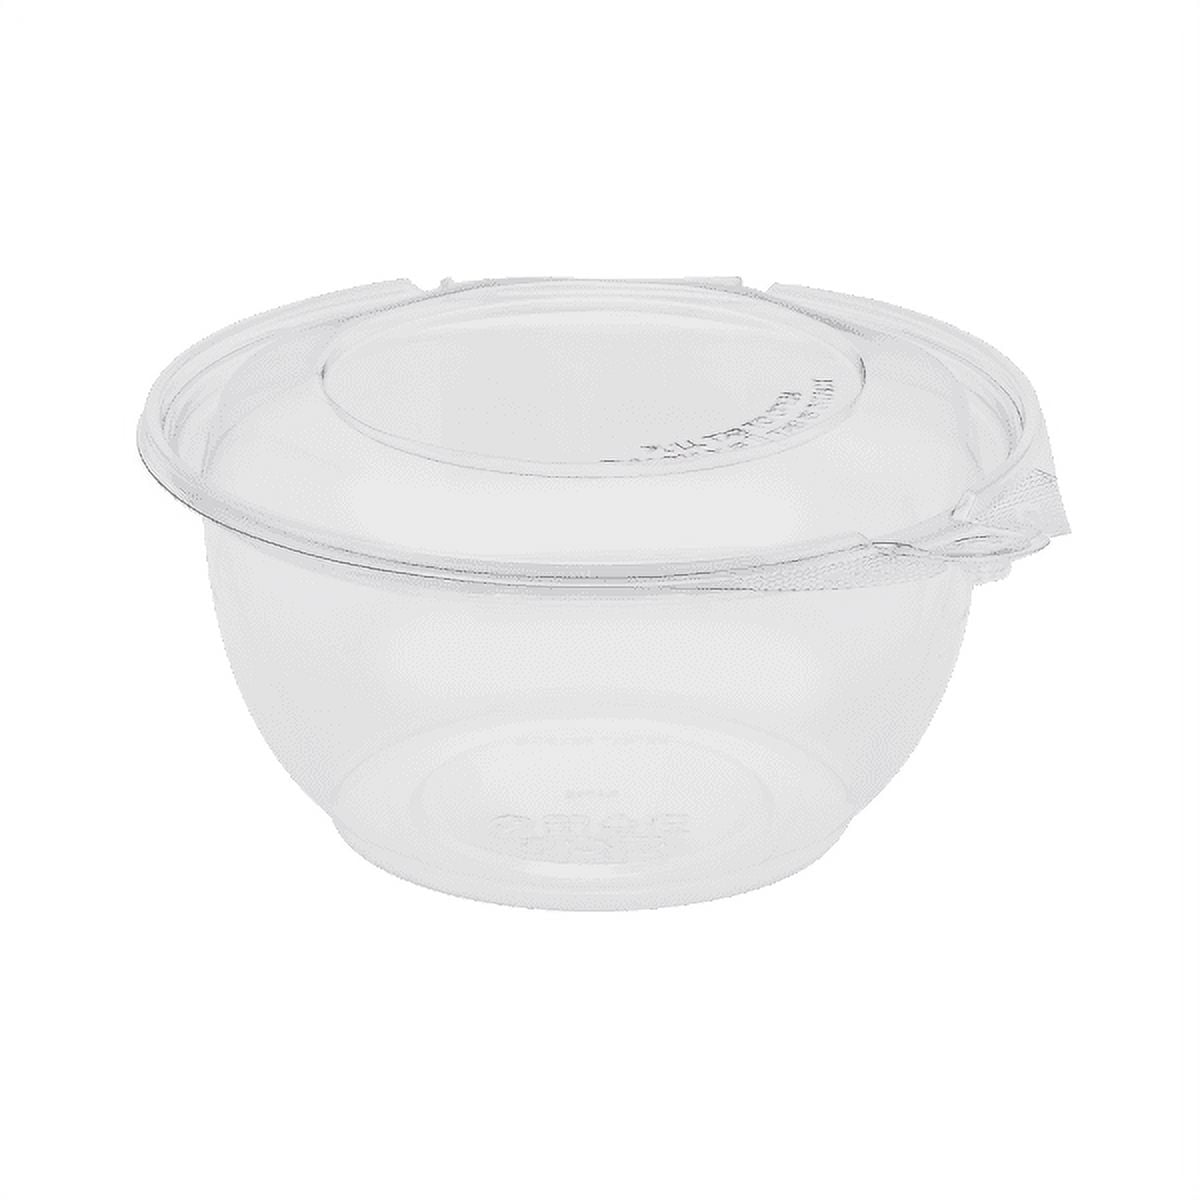 Vezee 64 oz Disposable BPA Free Rose Bowl / Salad Containers with Lids in Clear Plastic Disposable for A Fresh Airtight Seal, Portable Serving Bowl